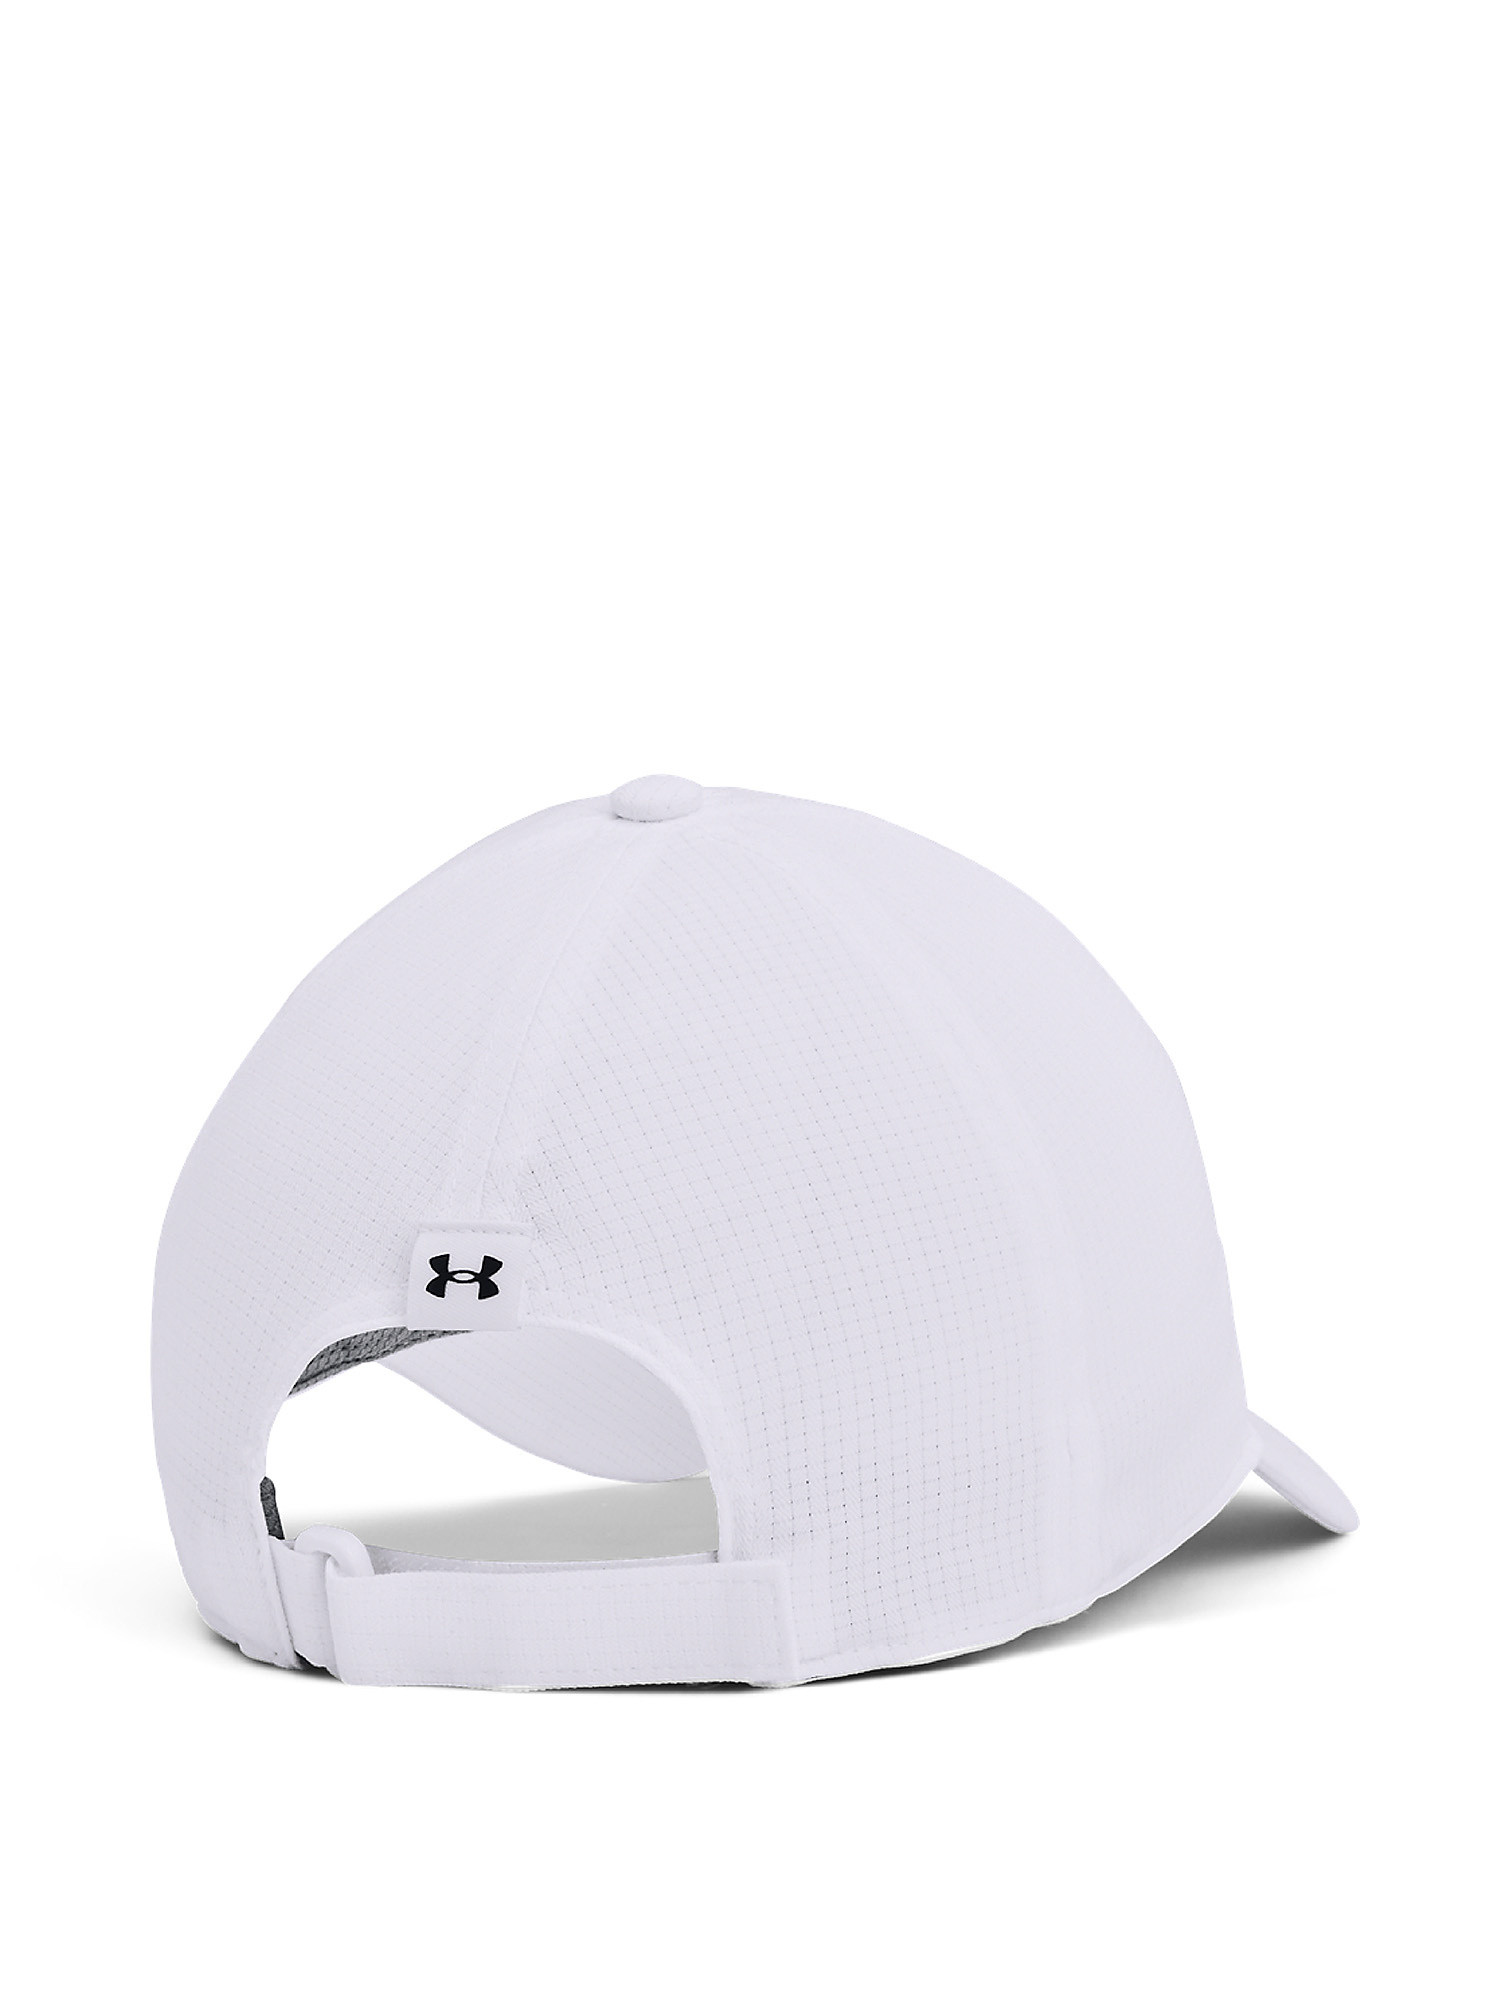 Under Armour - UA Iso-Chill ArmourVent™ Adjustable hat, White, large image number 1